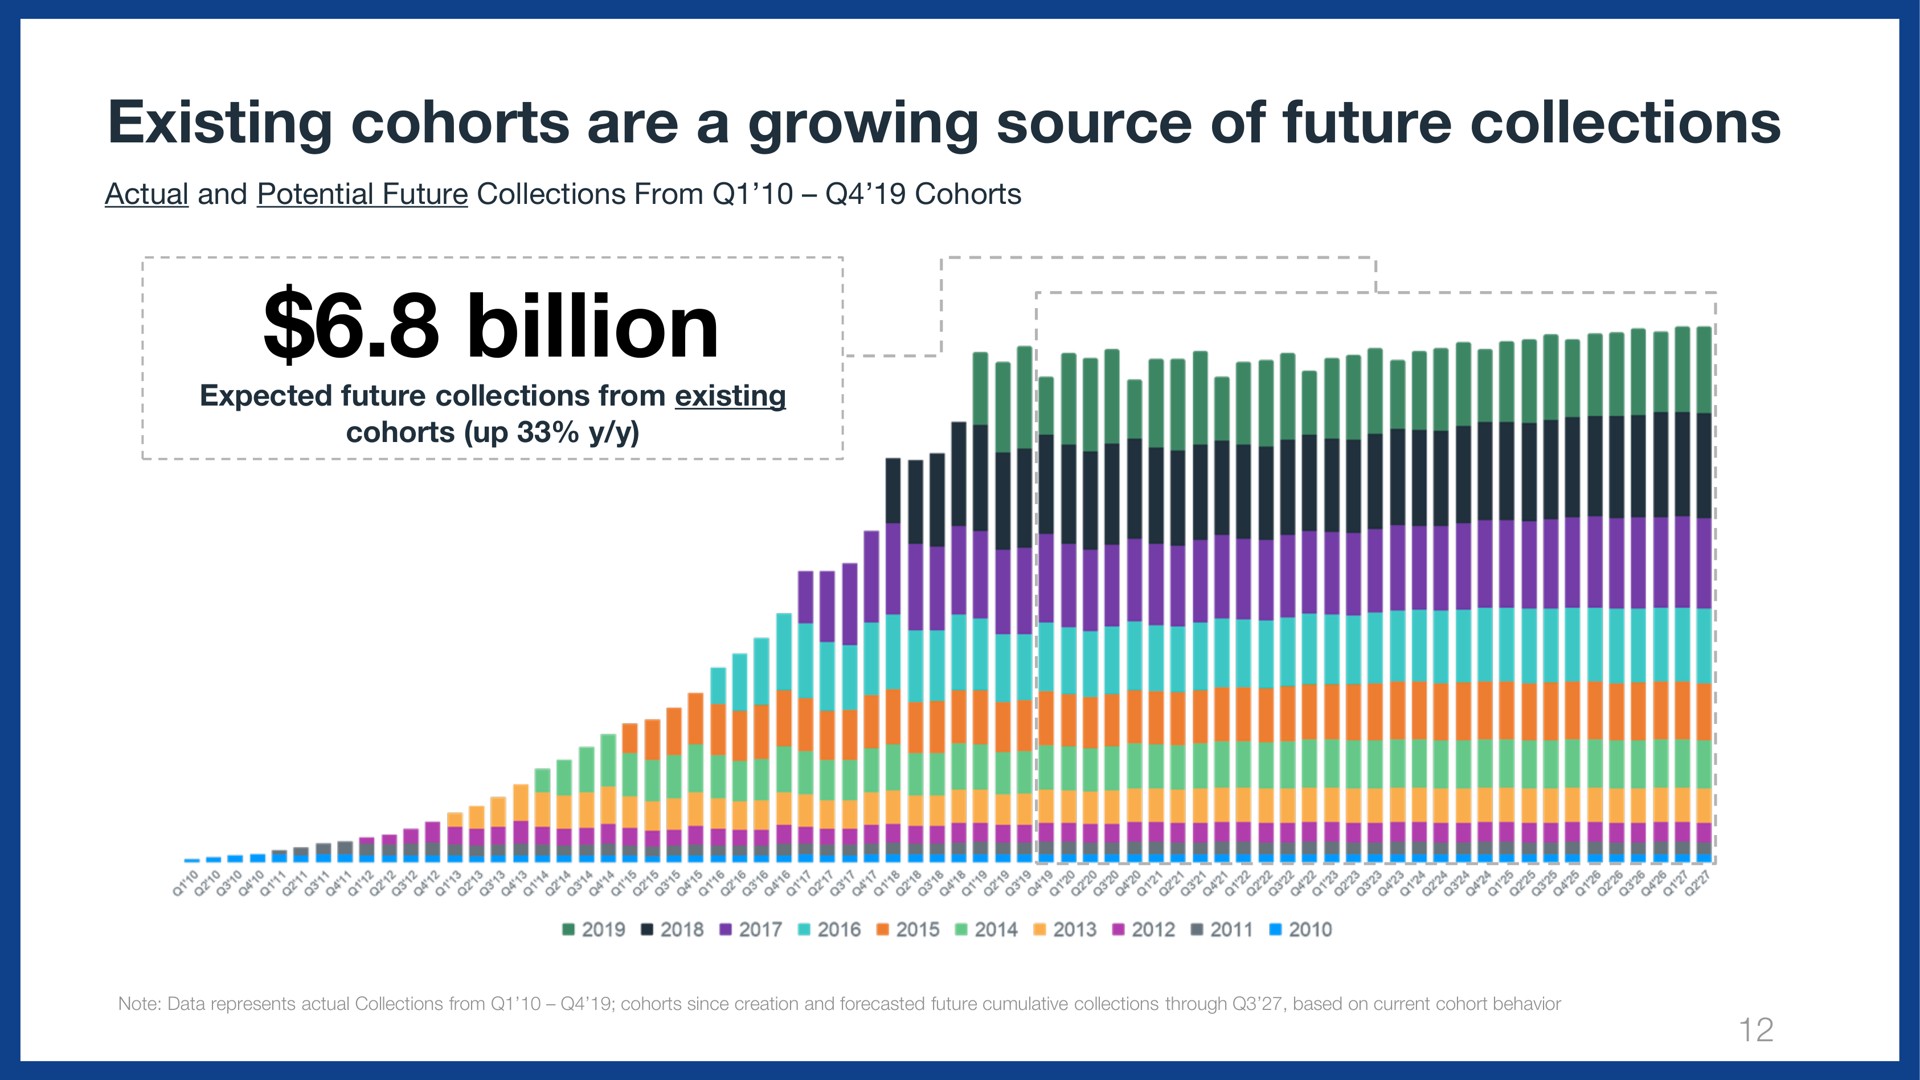 existing cohorts are a growing source of future collections billion deer | Wix